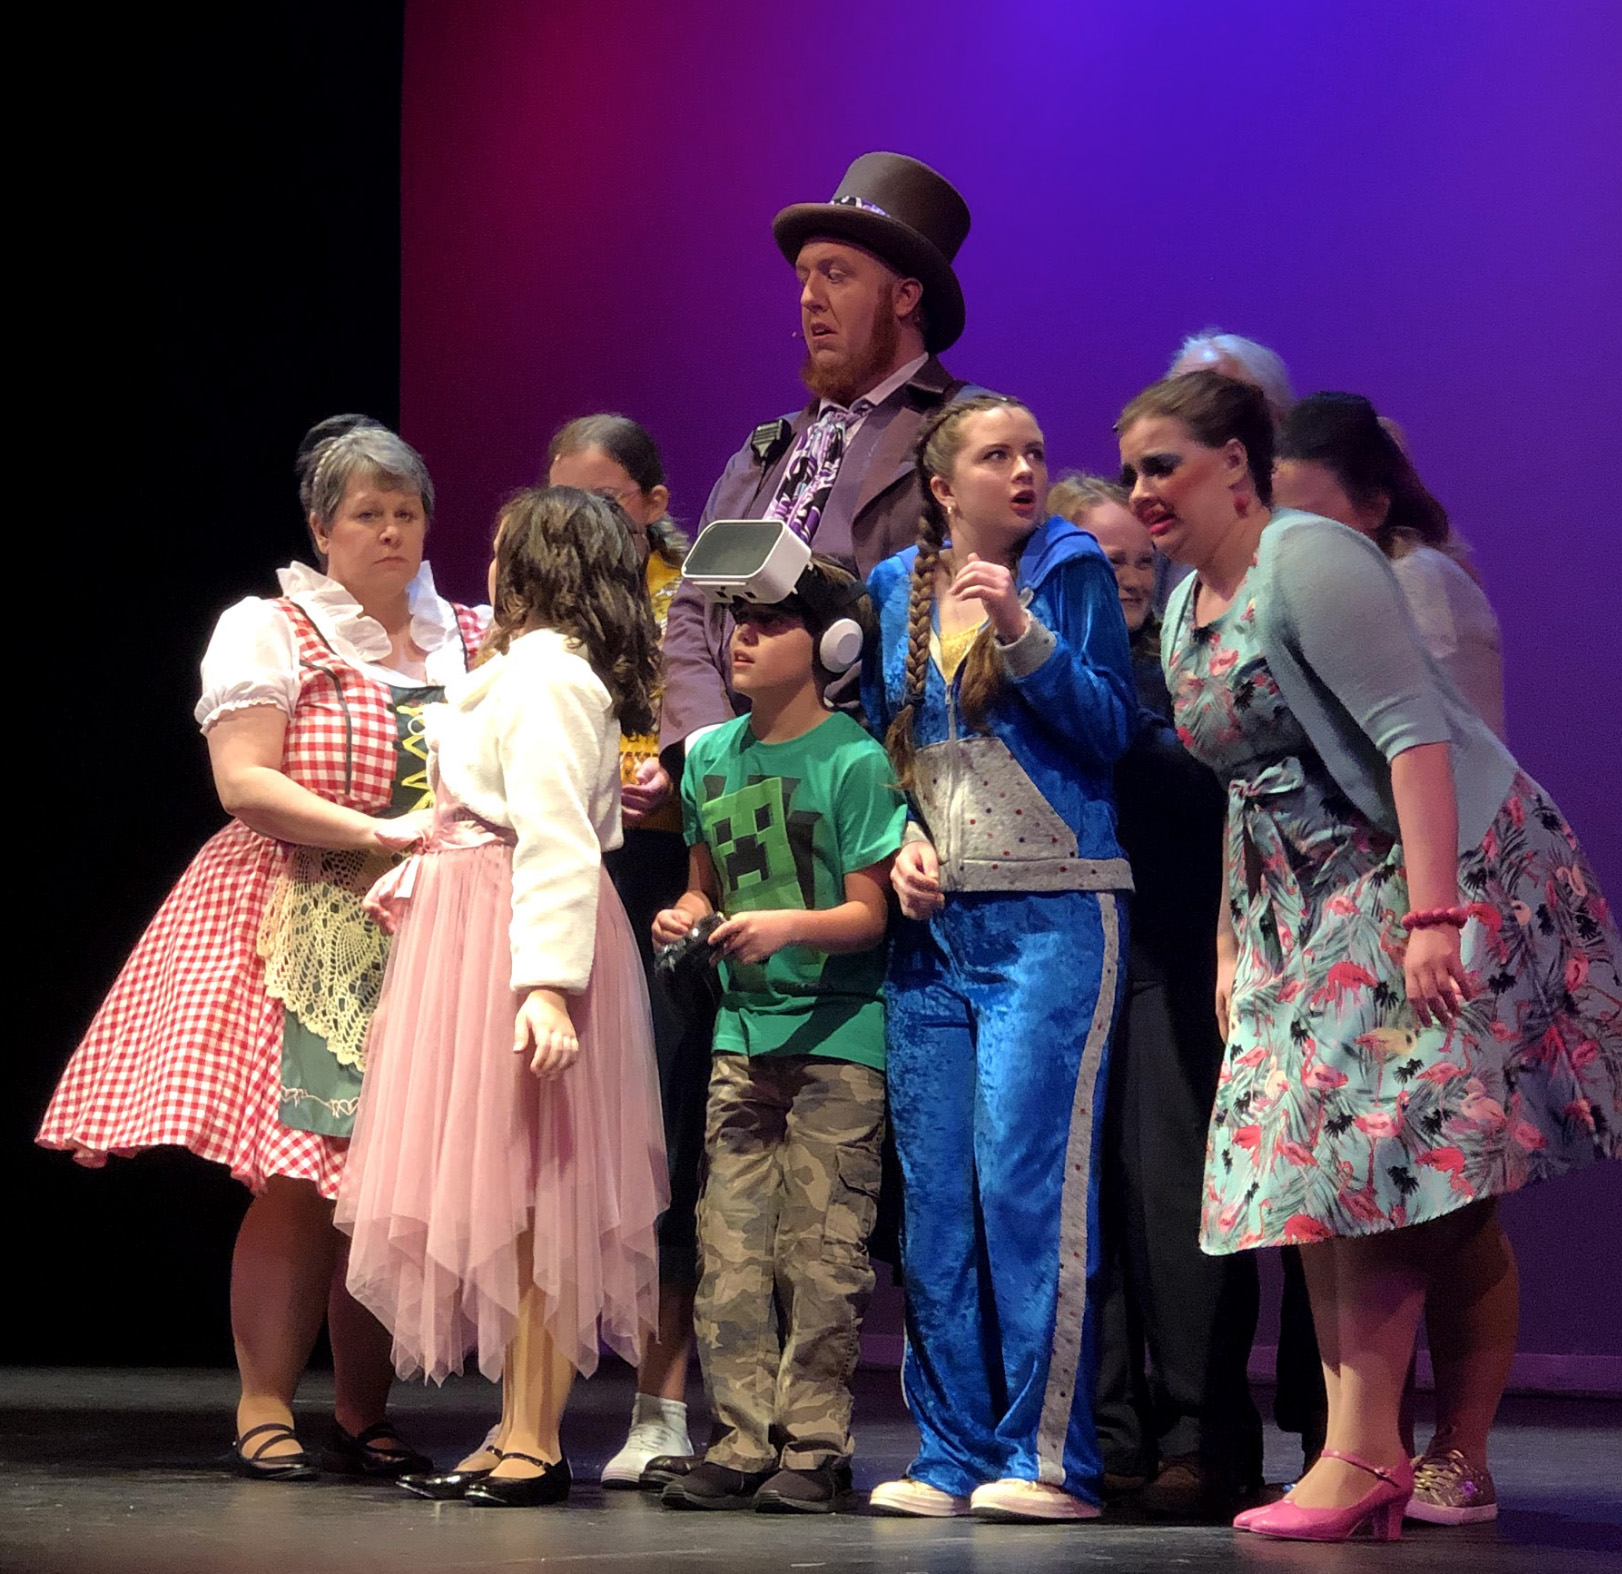 PHOTO: Willy Wonka remaining calm while golden ticket winners and their parents are anxious about seeing the chocolate factory. The guest are huddled around Wonka with him standing in the center. Photo by The Signal reporter Kathryn Wickenhofer.